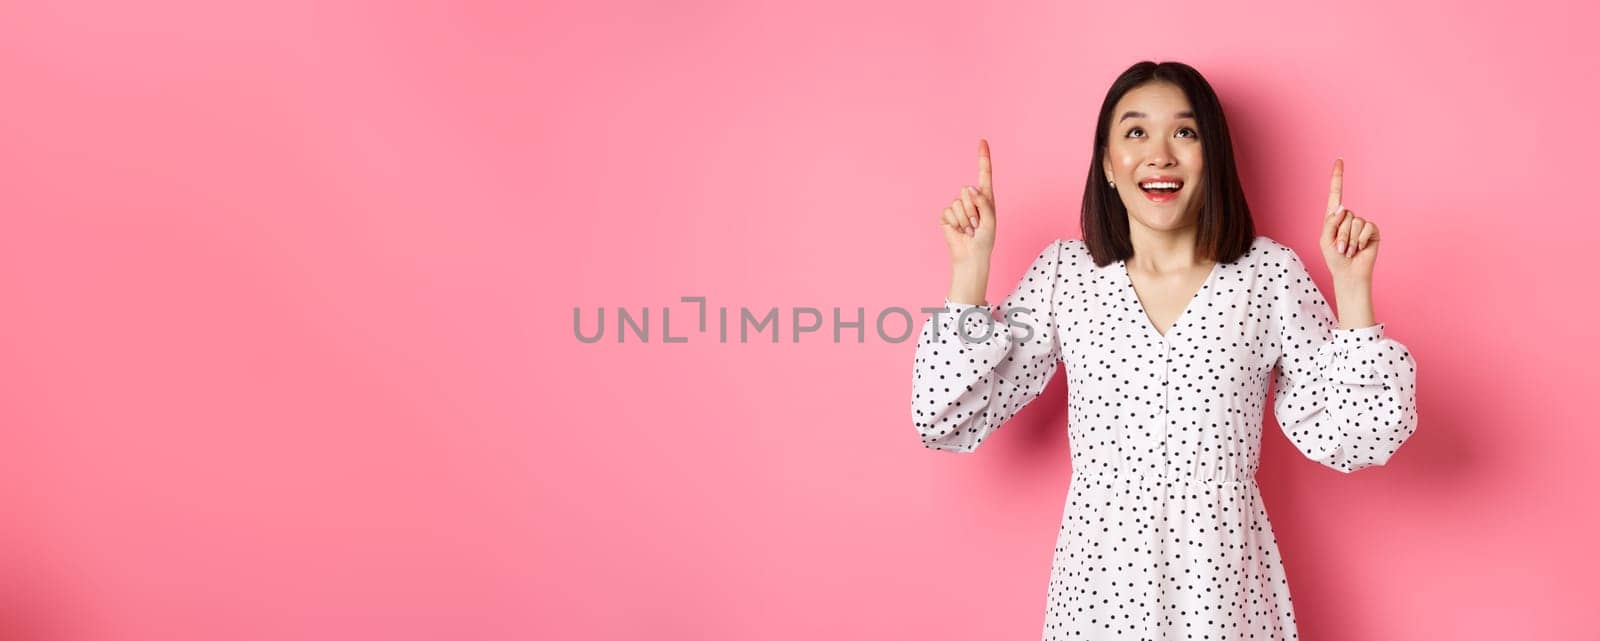 Amazed brunette girl in dress looking, pointing fingers up, showing logo with wondered smile, standing over pink background.